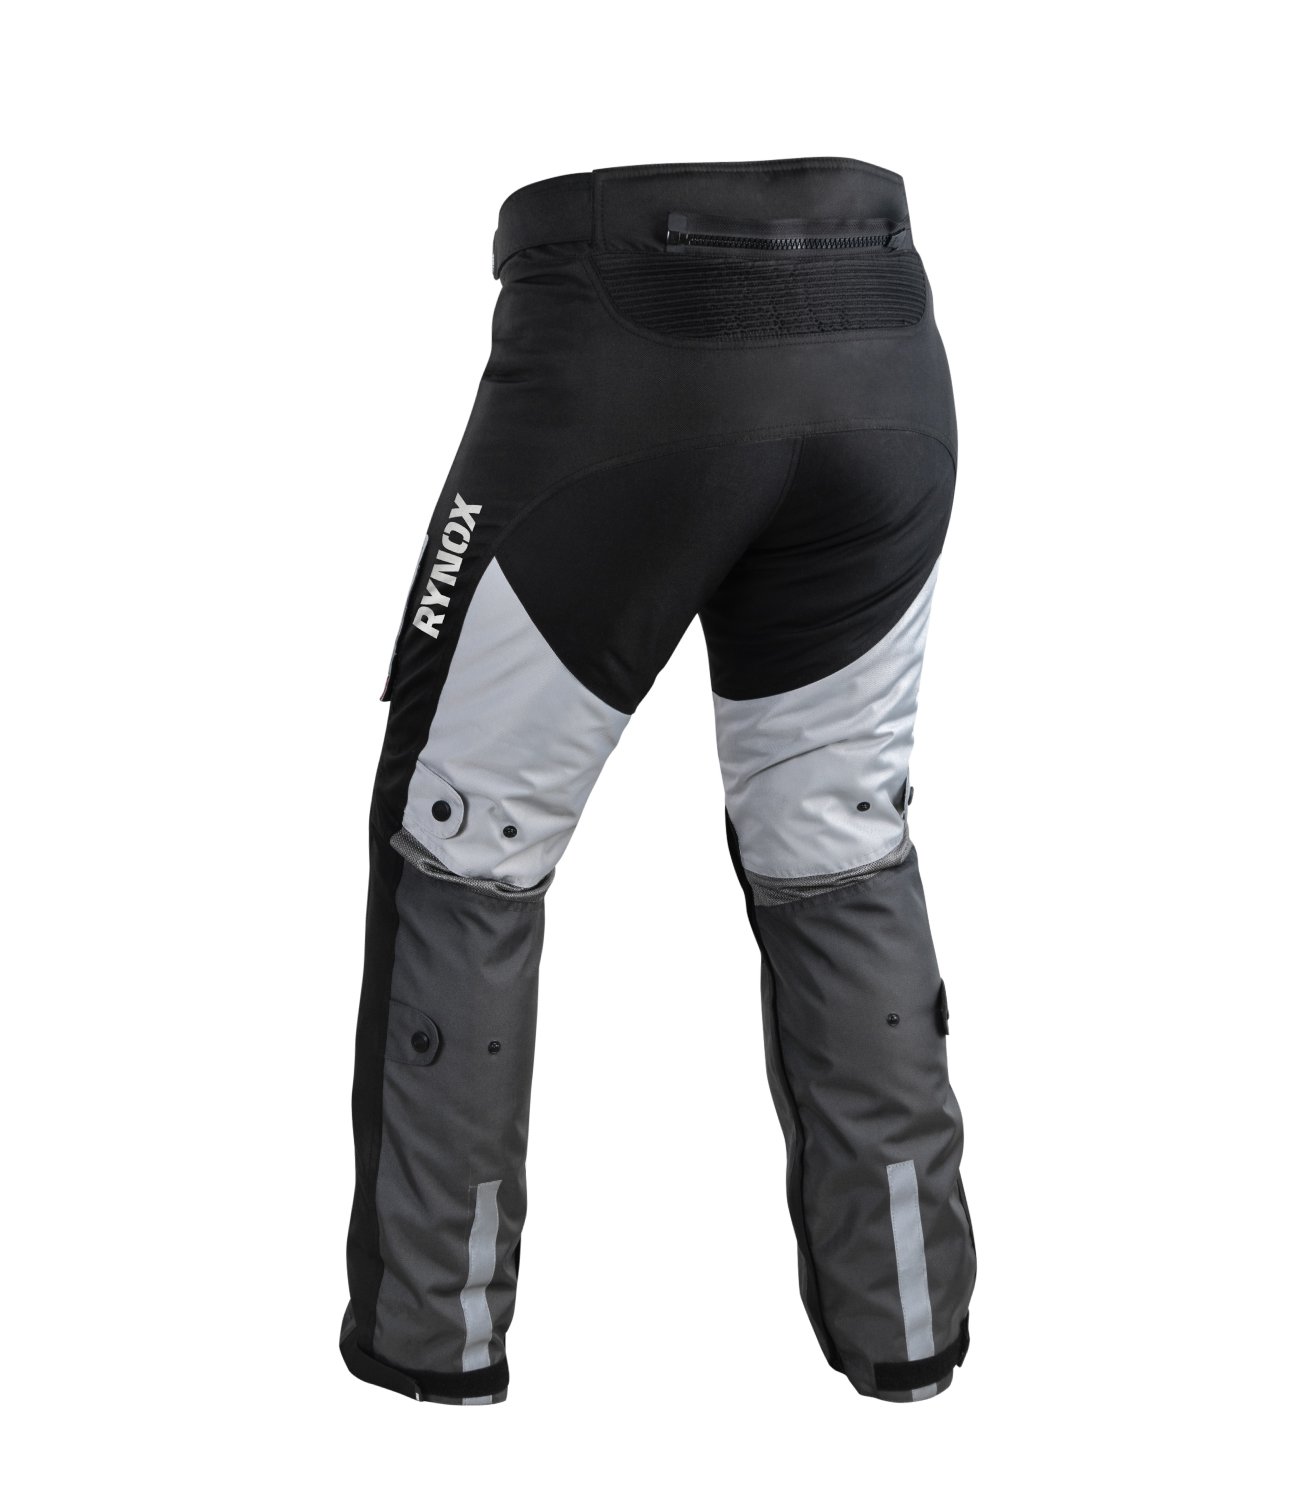 My New Solace CoolPro Mesh Riding Pant Review - YouTube